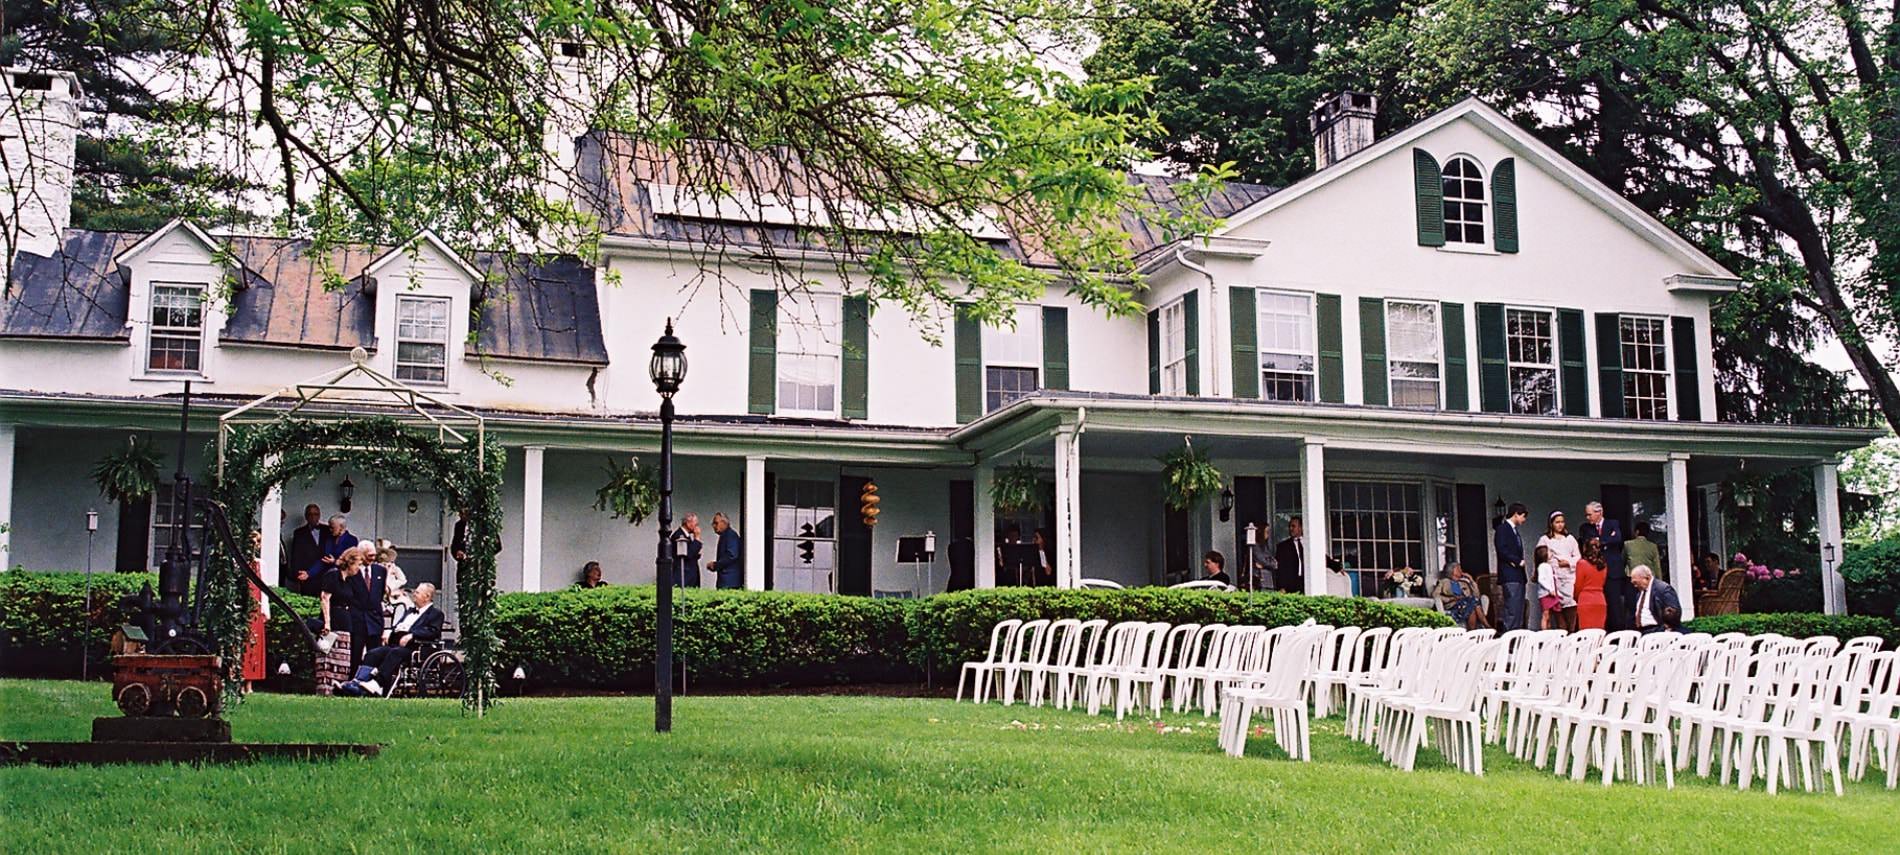 Exterior view of property painted white with dark shutters set up for a wedding with white chairs on the lawn